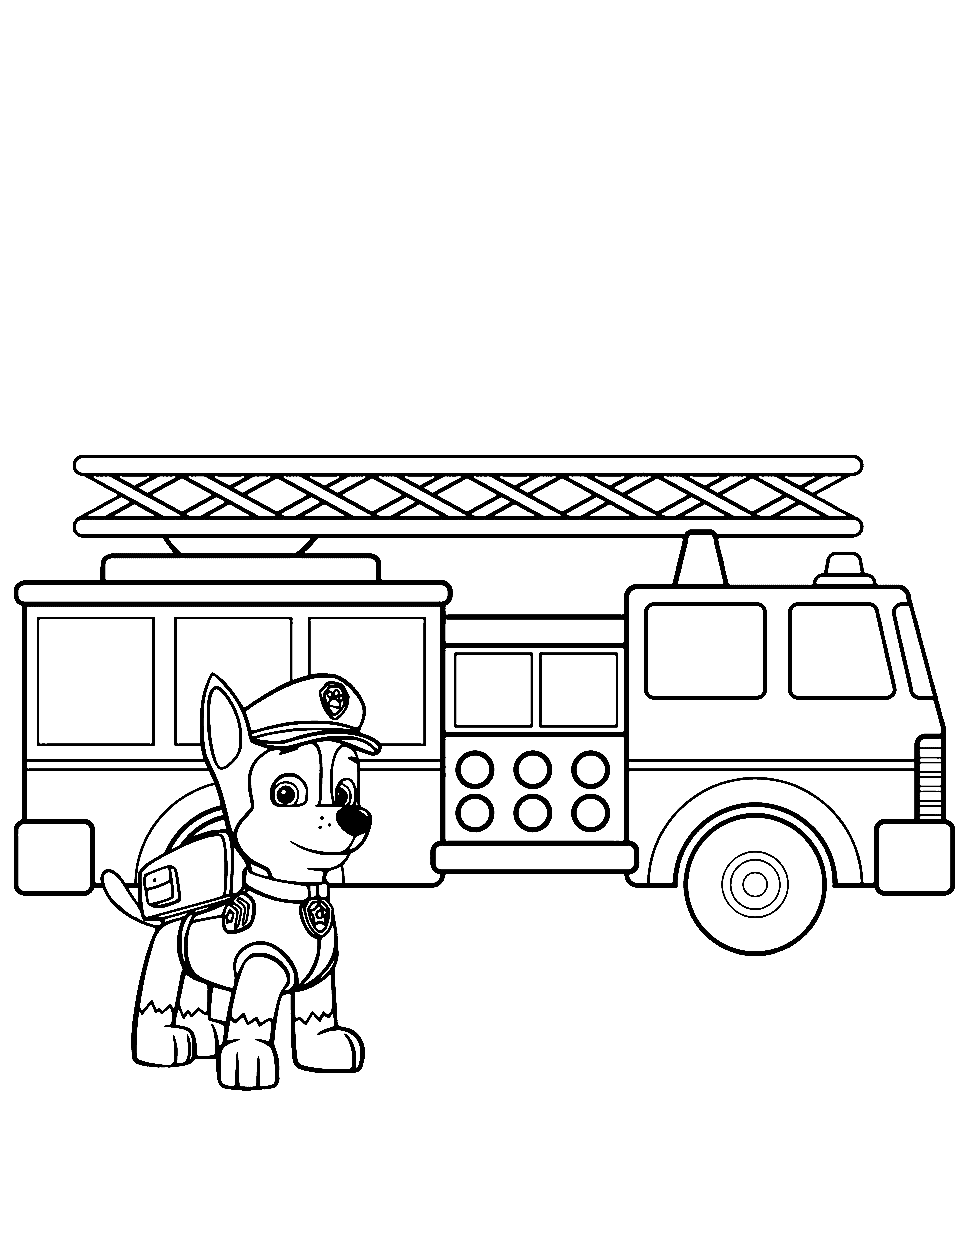 Chase the Firefighter Fire Truck Coloring Page - The character Chase from Paw Patrol dressed as a firefighter beside a fire truck.